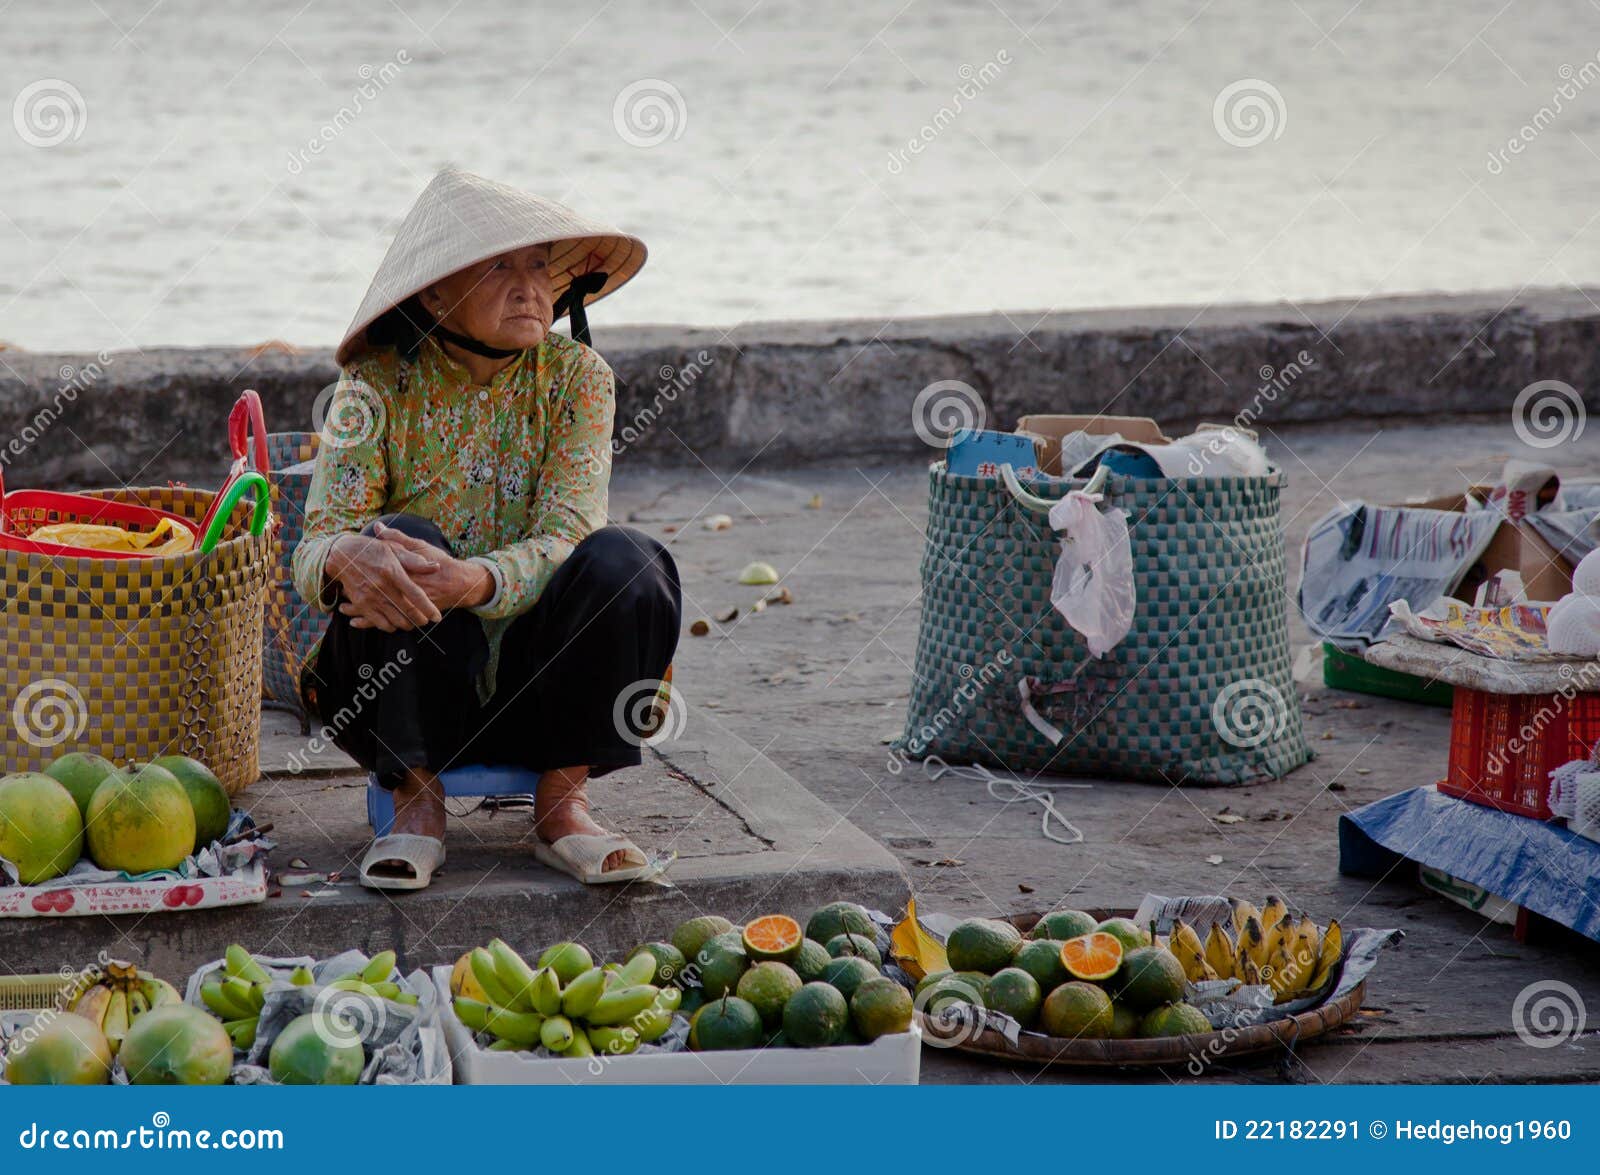 Old Woman Selling Fruit In A Market Editorial Photo ...